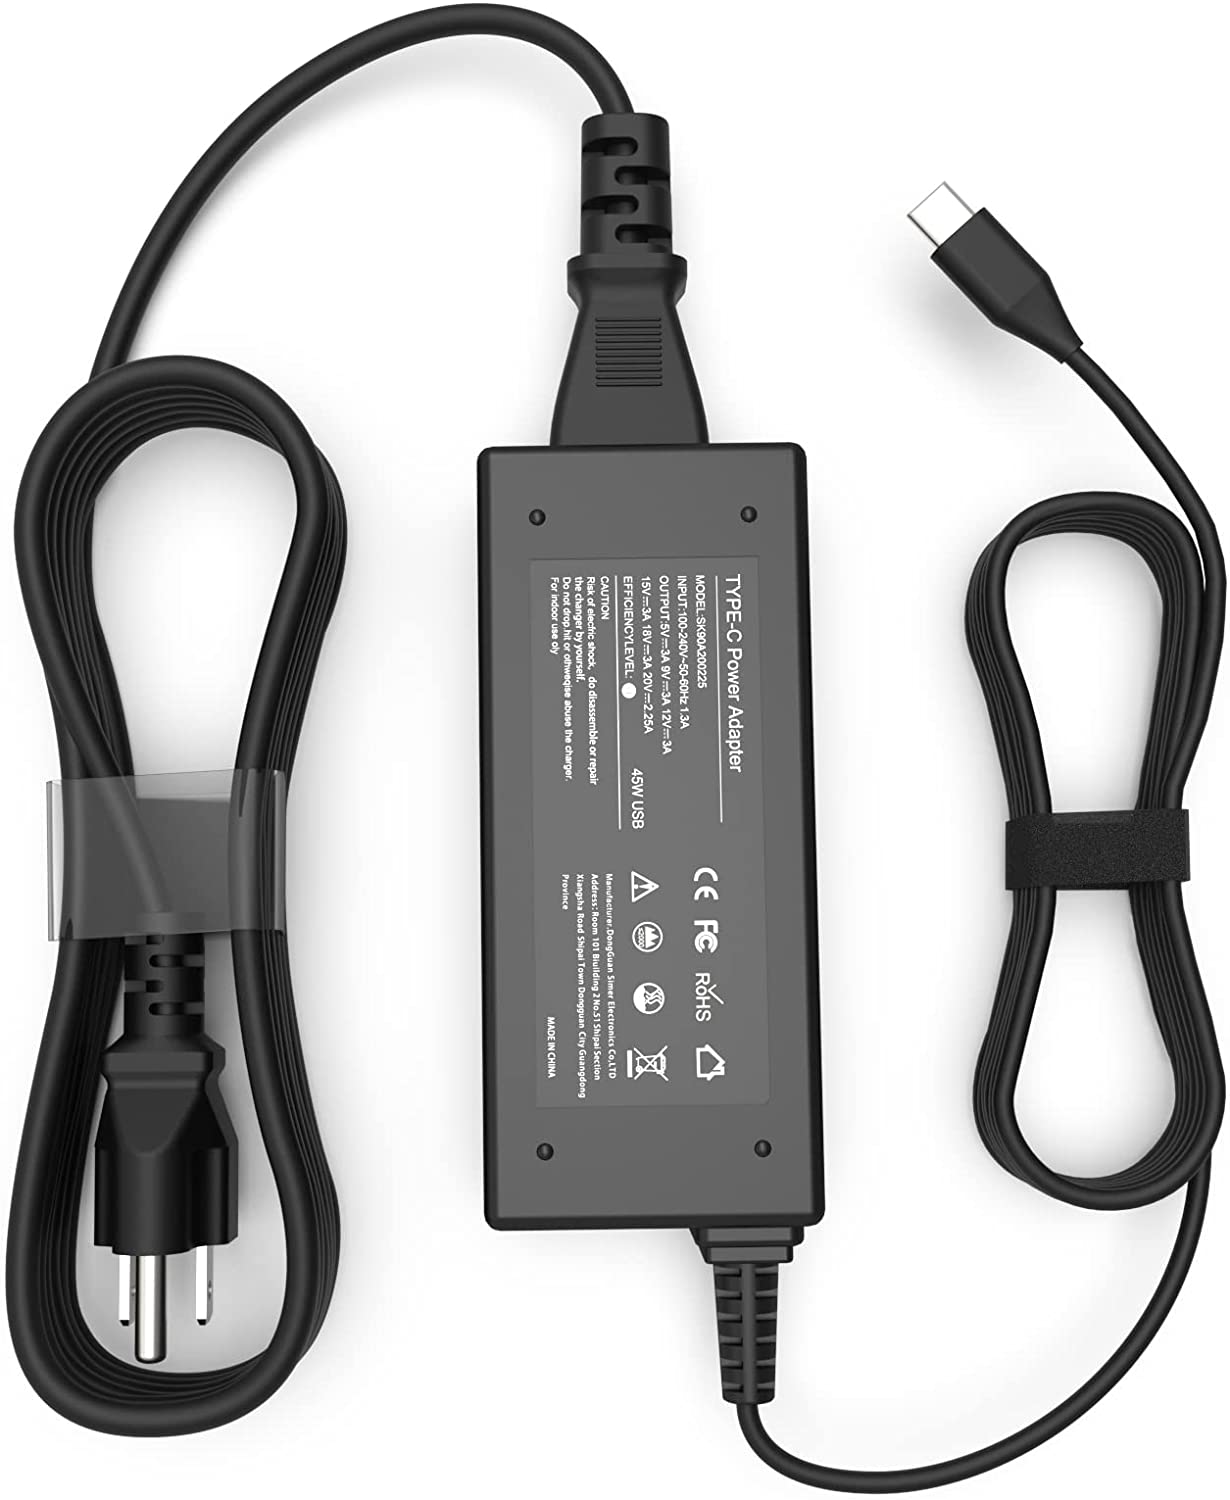 Chromebook Charger WholeSale - Price List, Bulk Buy at